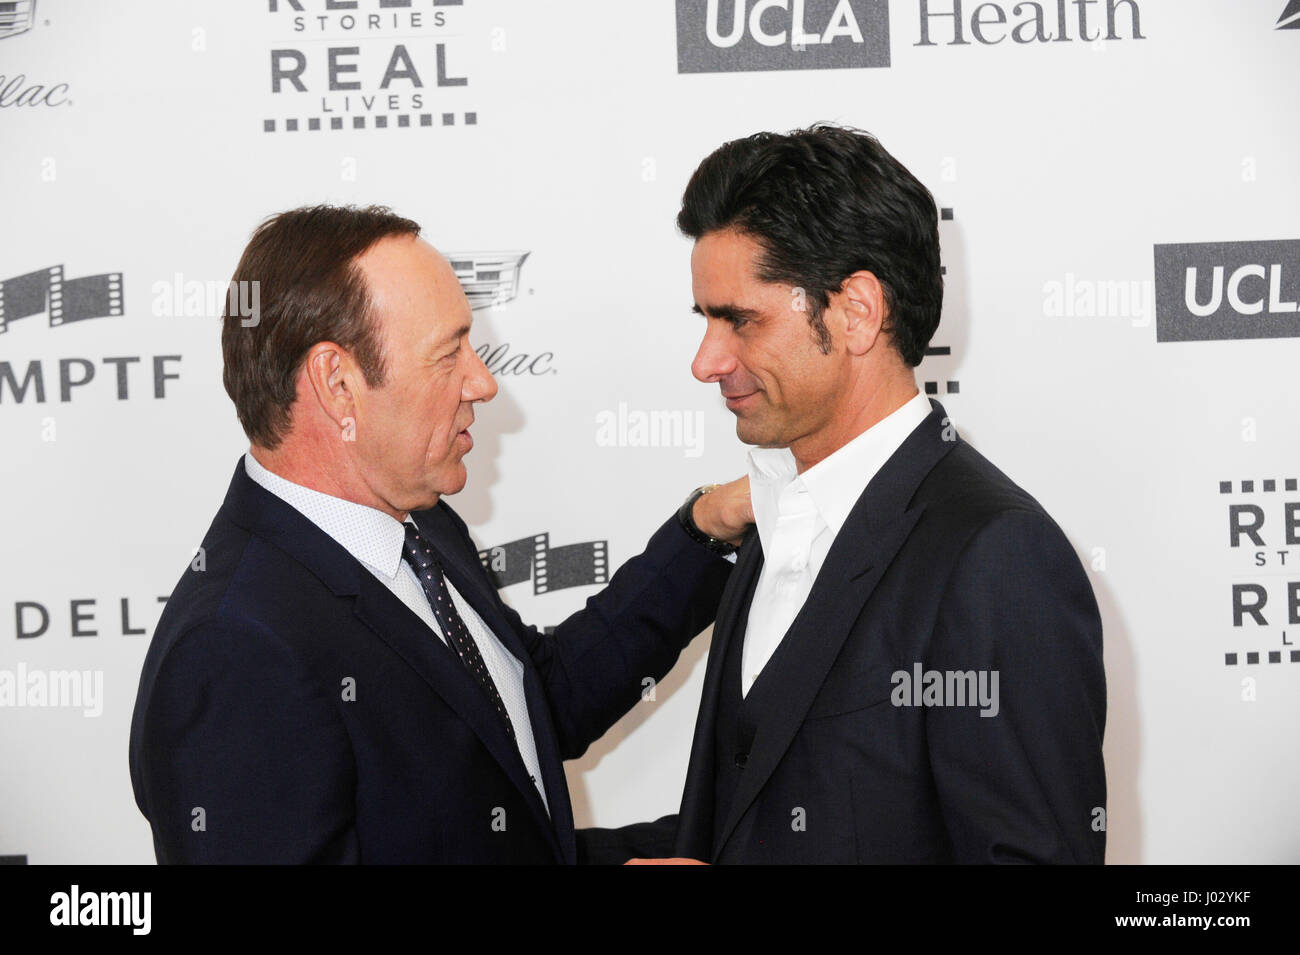 Honoree Kevin Spacey (L) and actor John Stamos attend the 4th Annual 'Reel Stories, Real Lives', benefiting the Motion Picture & Television Fund at Milk Studios on April 25, 2015 in Hollywood, California. Stock Photo